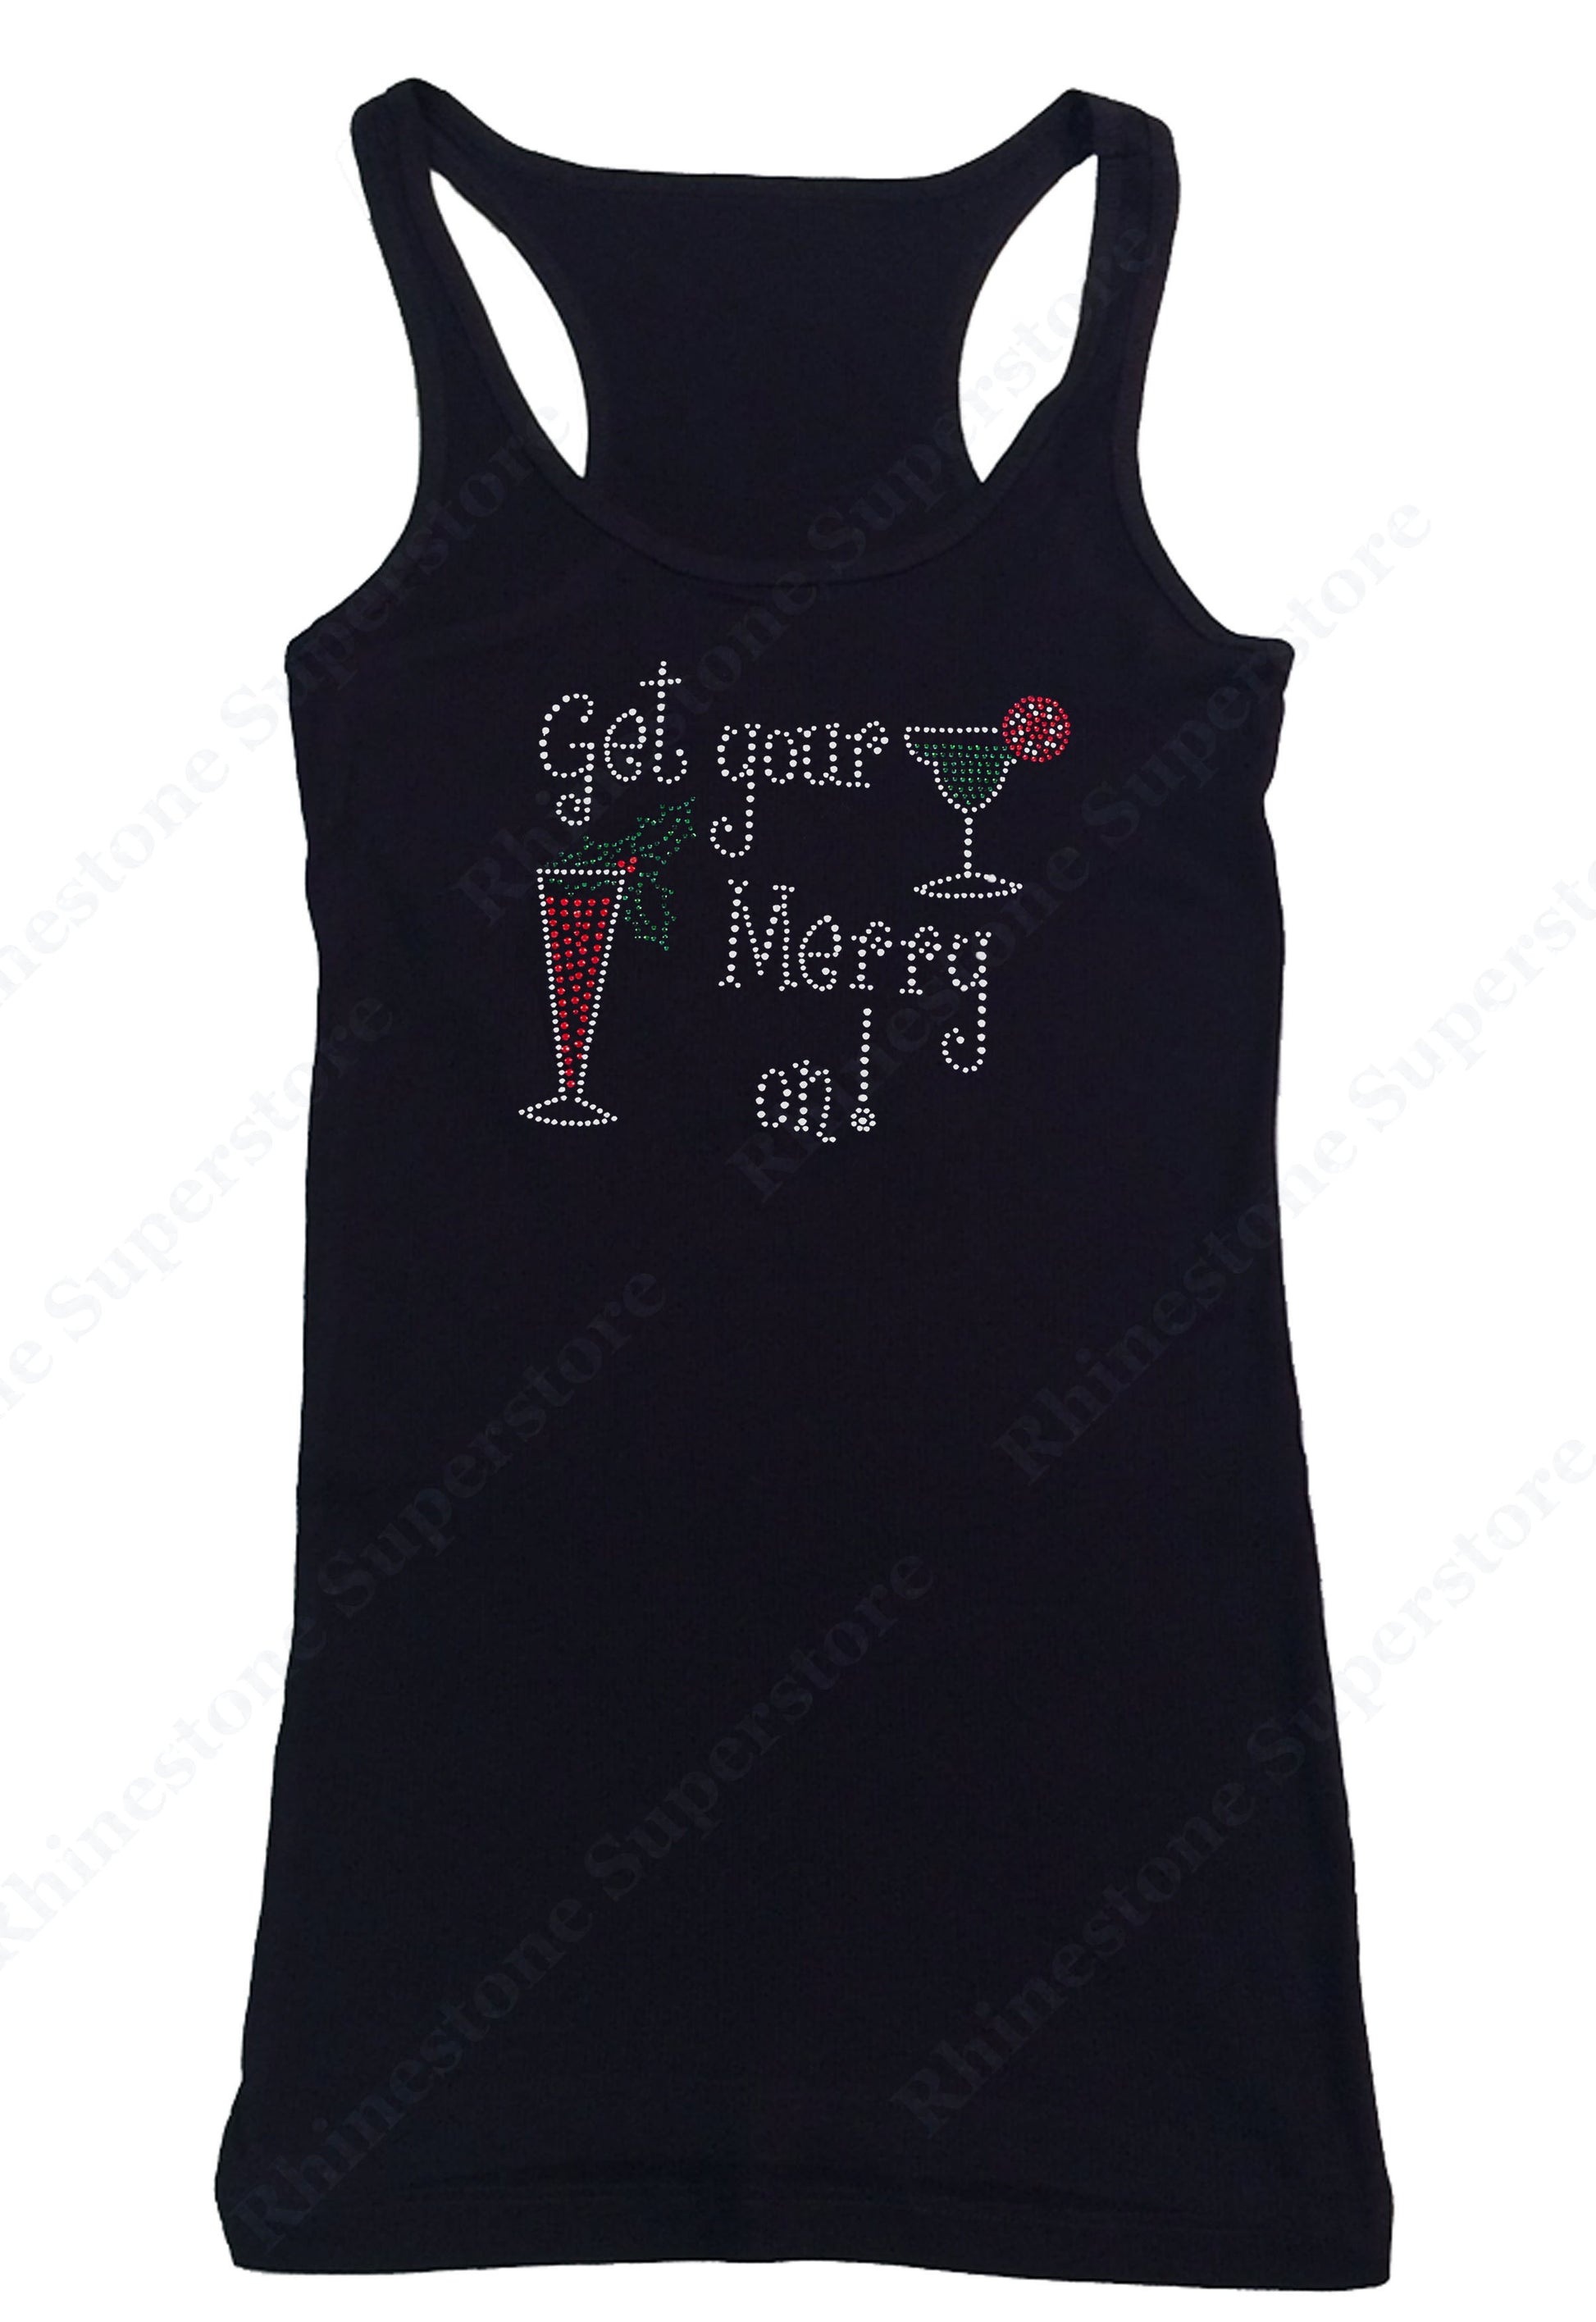 Get Your Merry On!  Christmas Design tank top